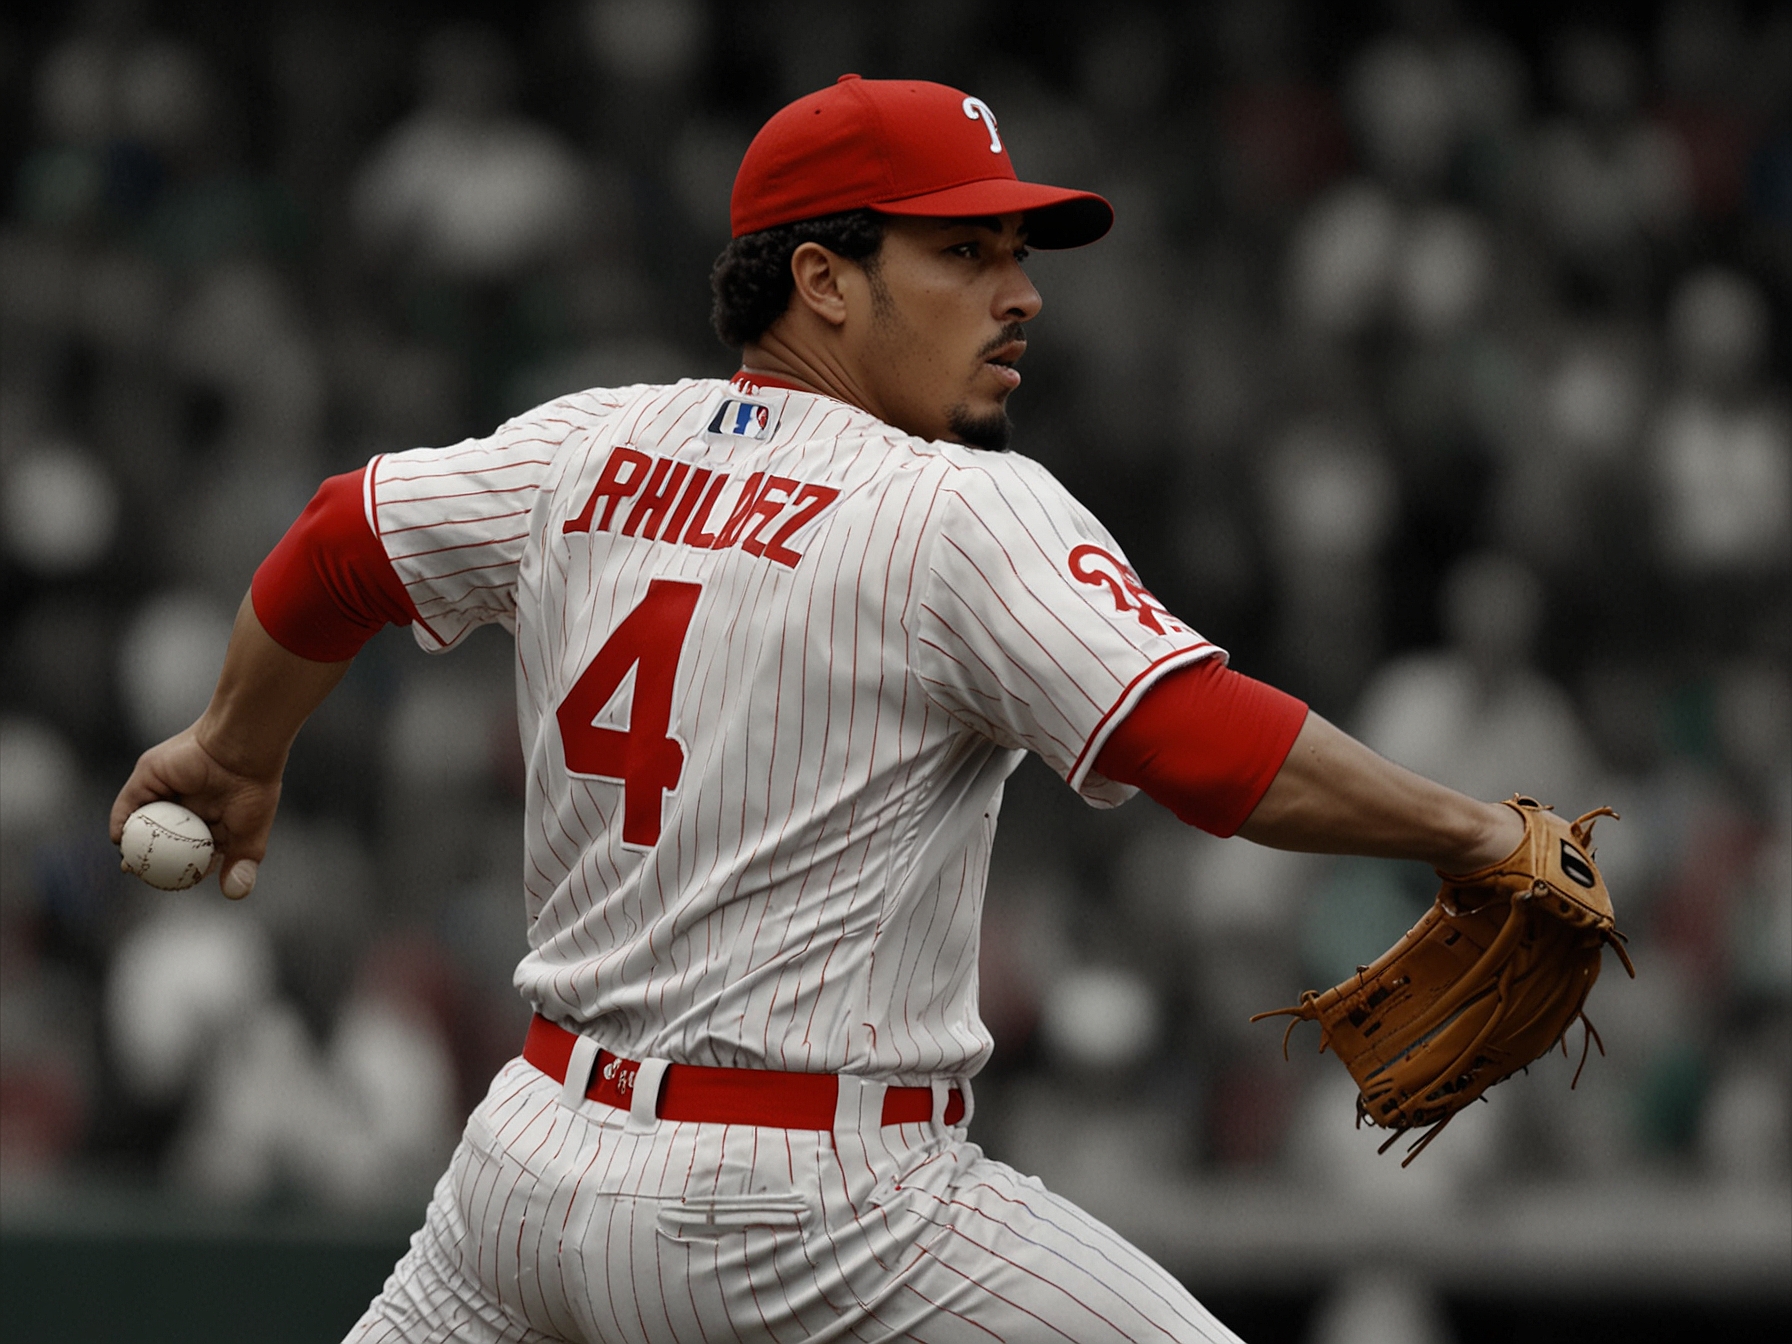 Cristopher Sanchez, wearing his Phillies uniform, delivers a powerful pitch during an intense game. His focused expression and dynamic form highlight his role as a key player in the team's pitching staff.